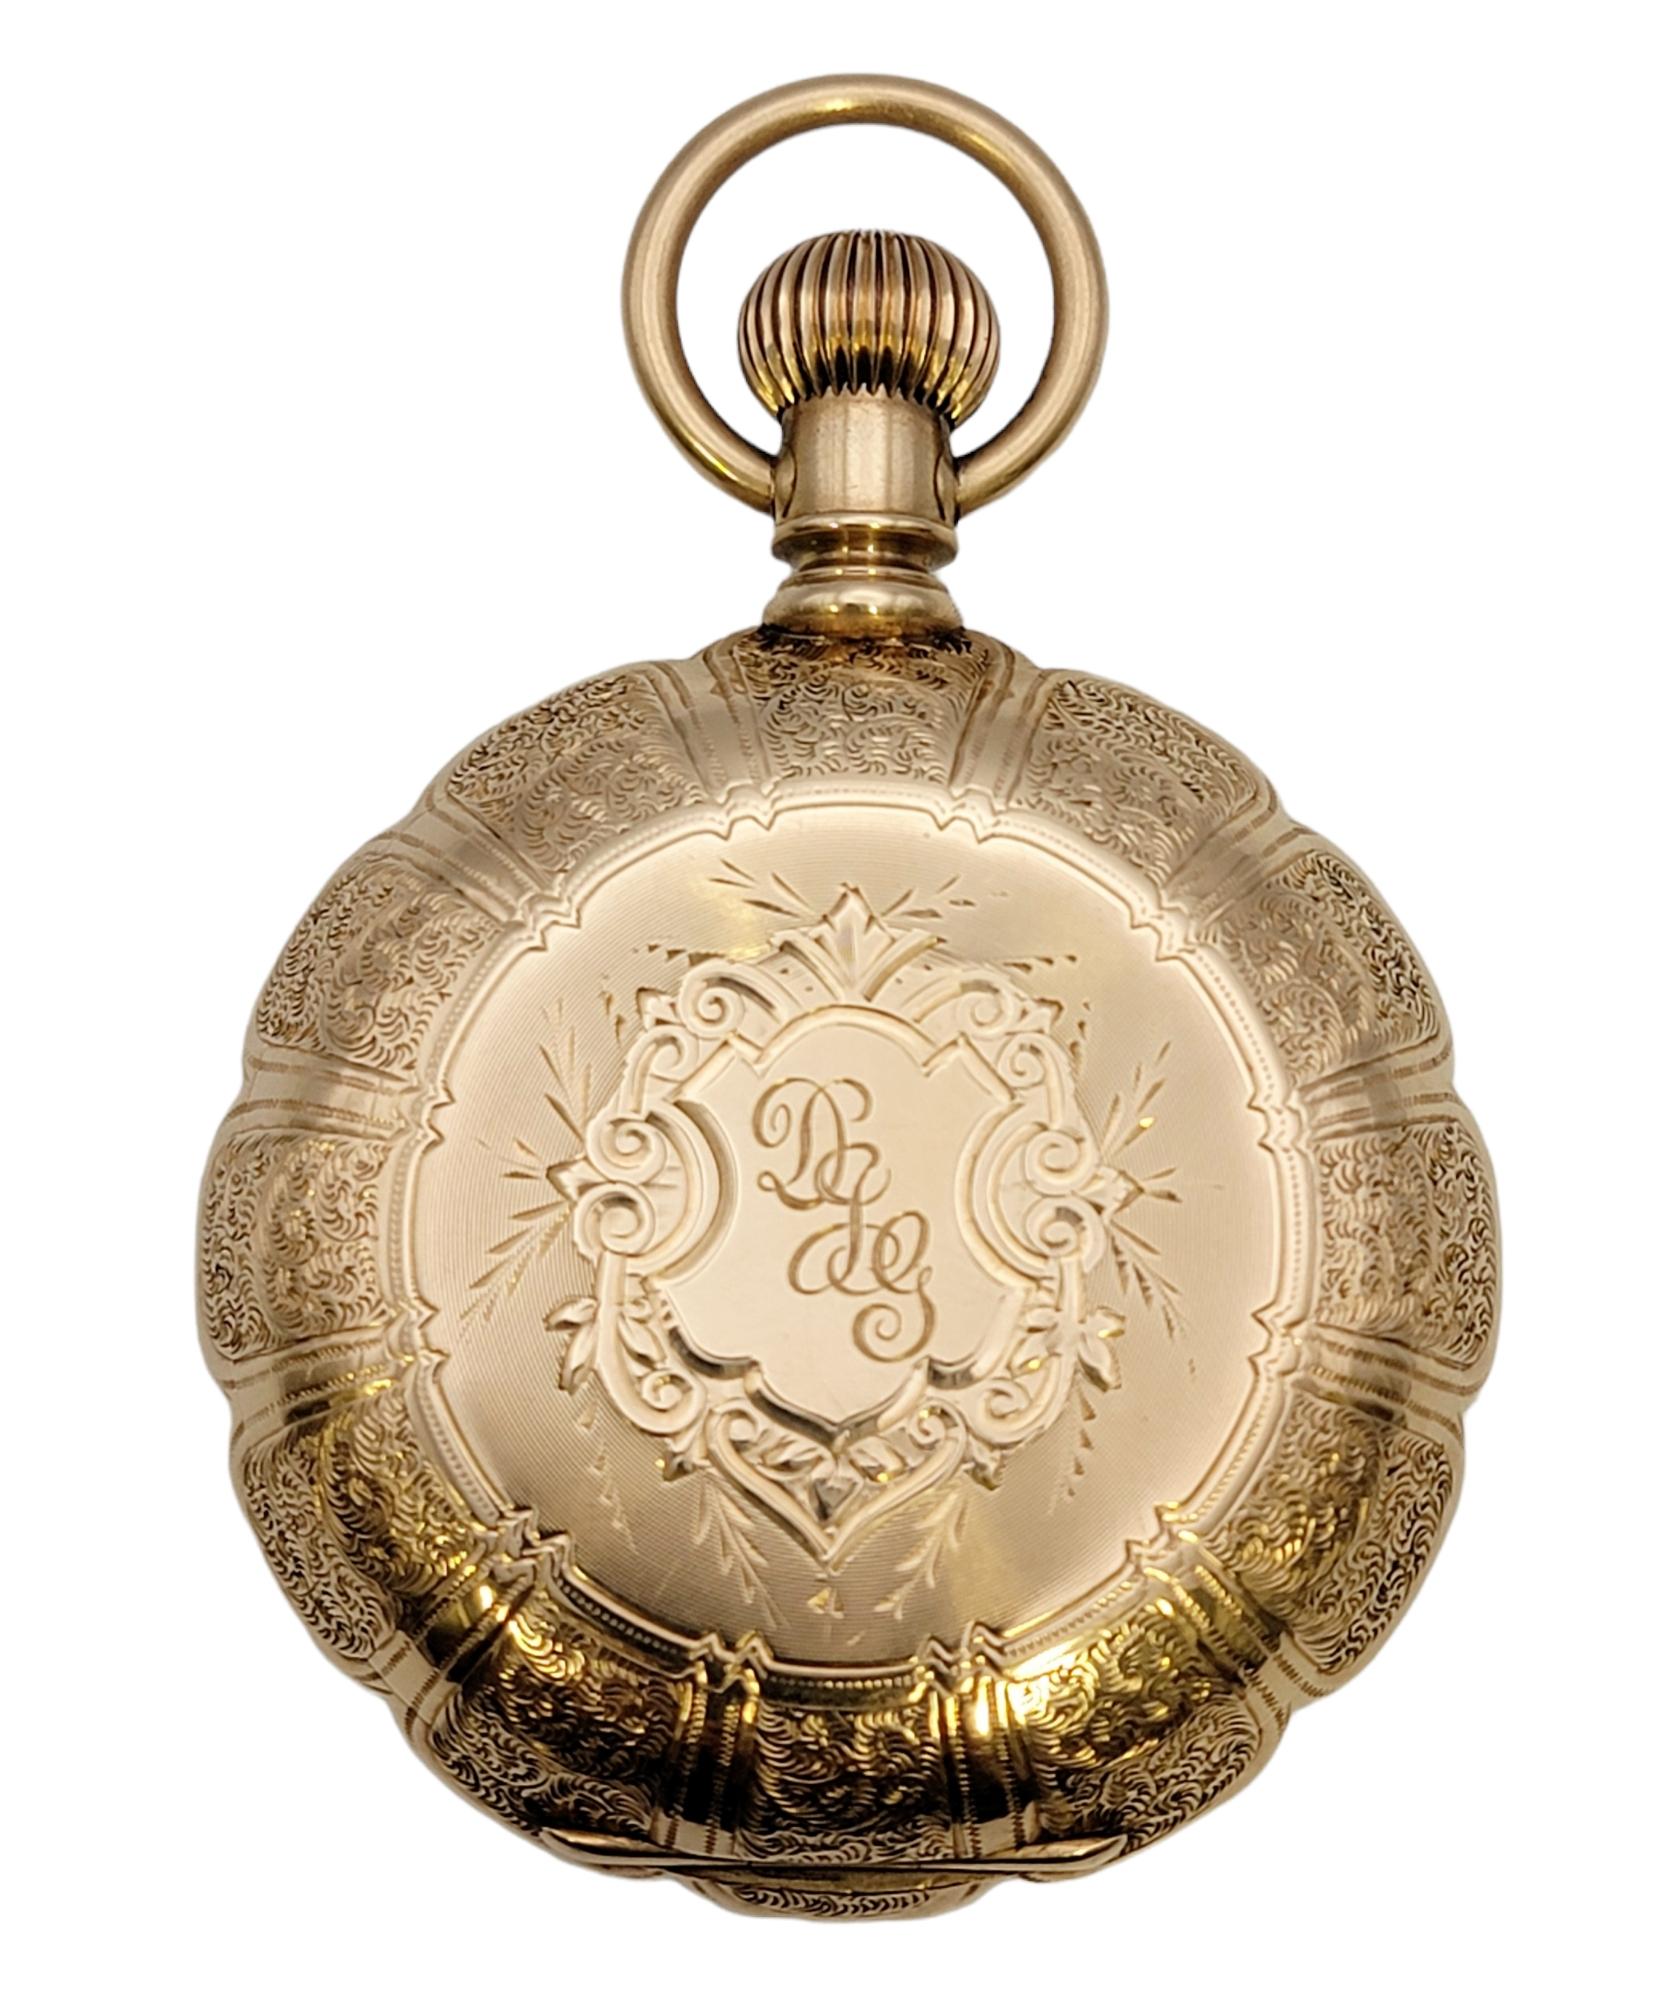 This rare vintage 14 karat yellow gold pocket watch by Waltham is a stunning piece of history. The luxury solid gold timepiece is made with exquisite fine details. It features a 46mm case with a round white dial, black Roman Numeral hour markers and